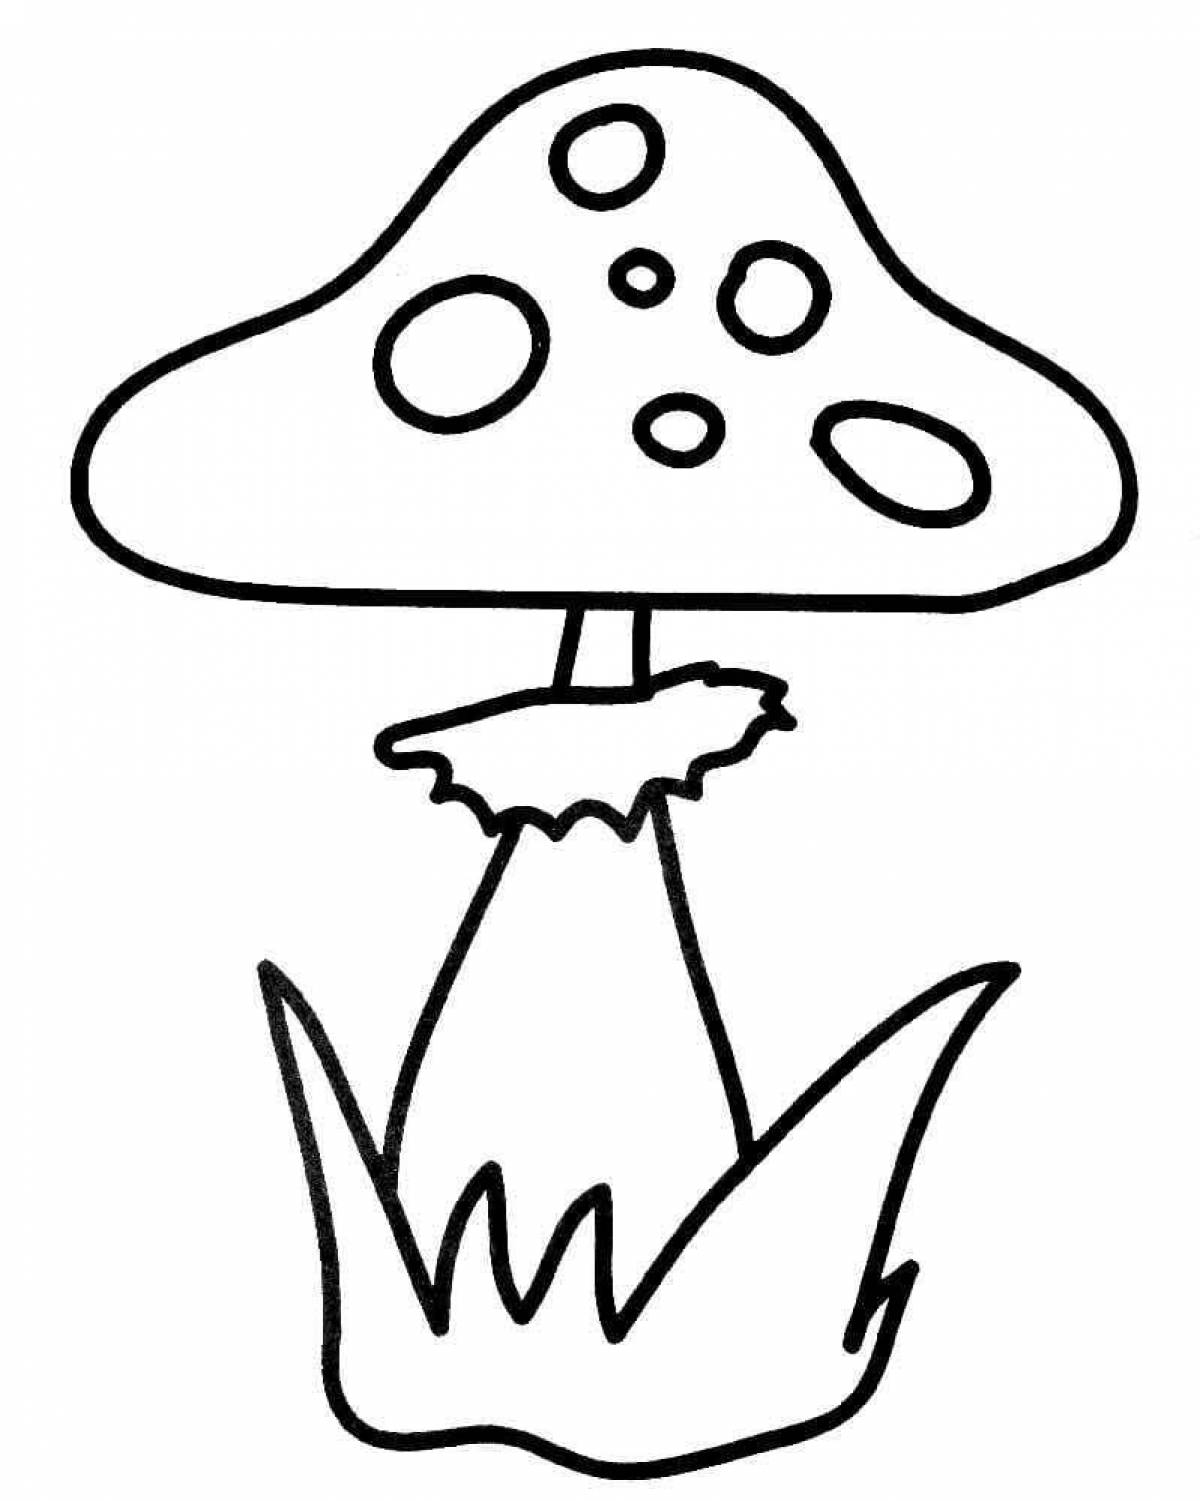 Glorious fly agaric coloring pages for kids